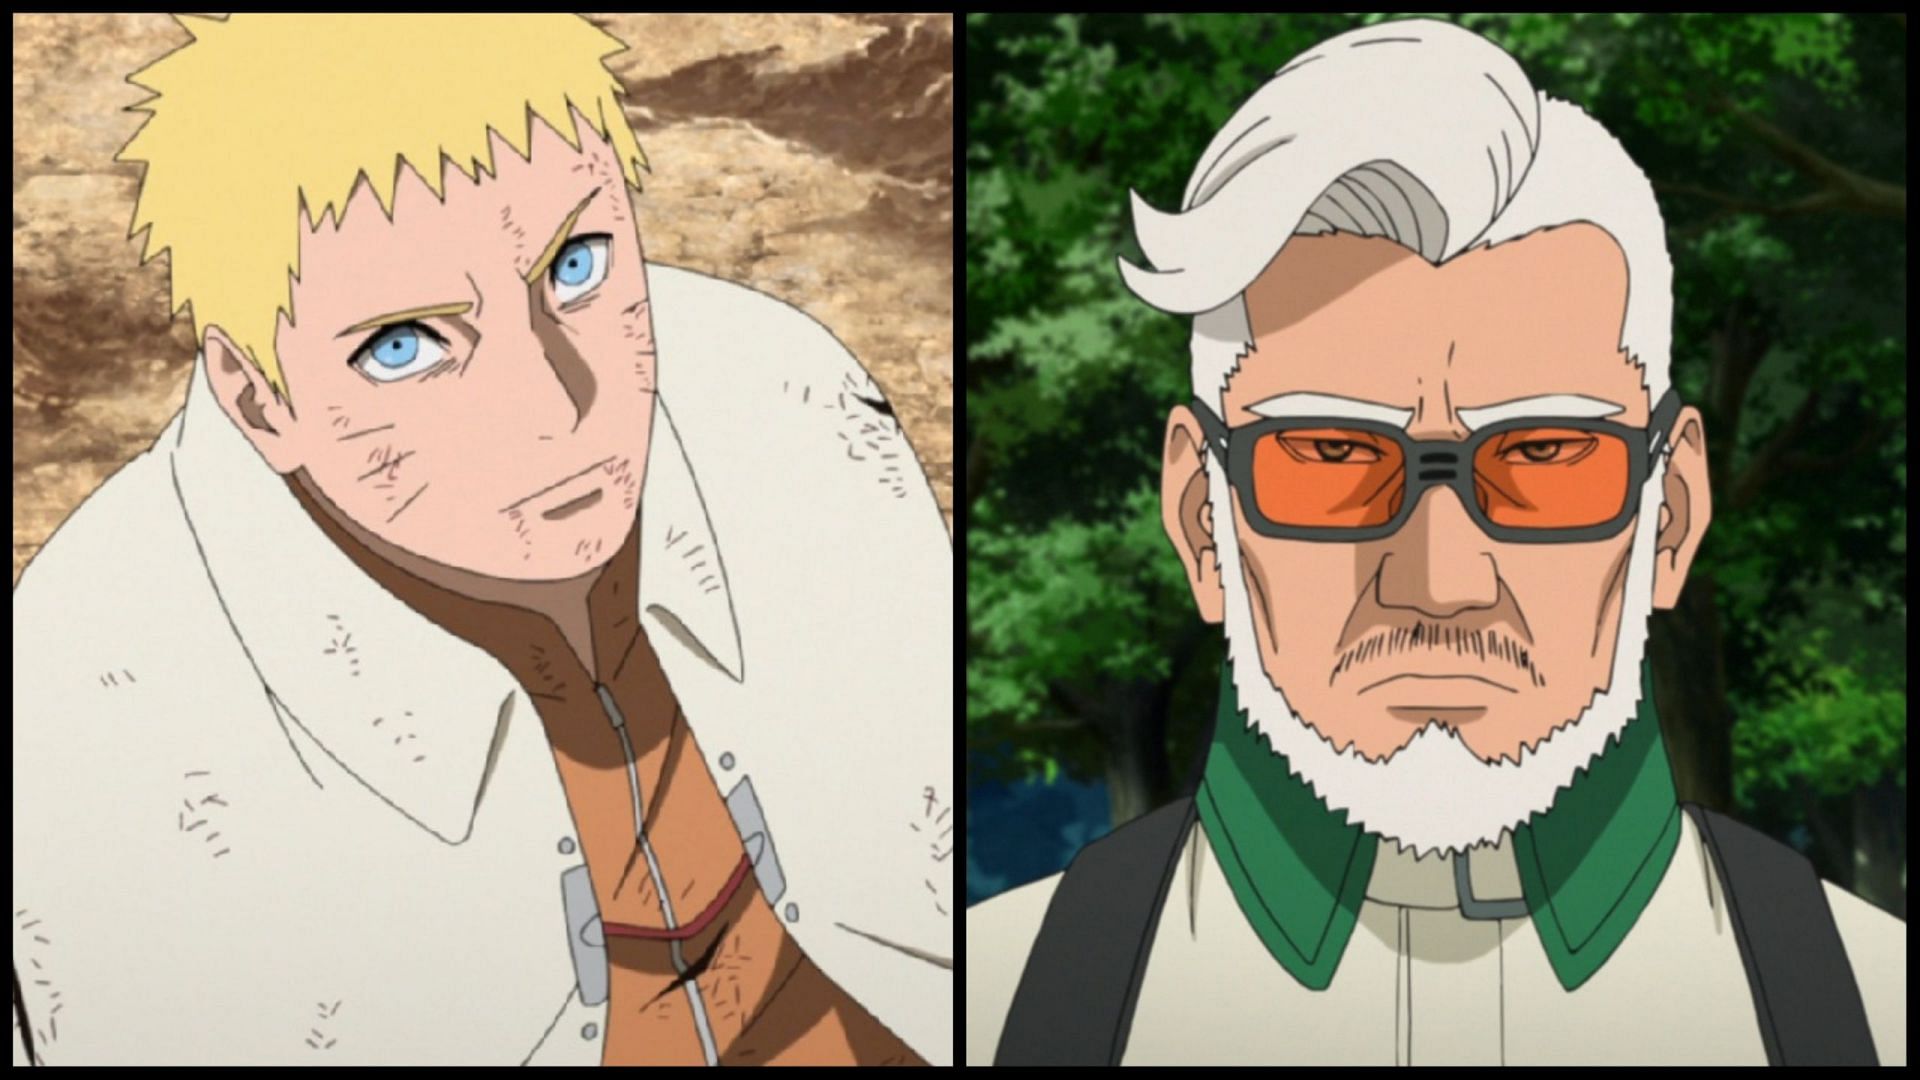 Naruto is not the Boruto character whose life is in major danger